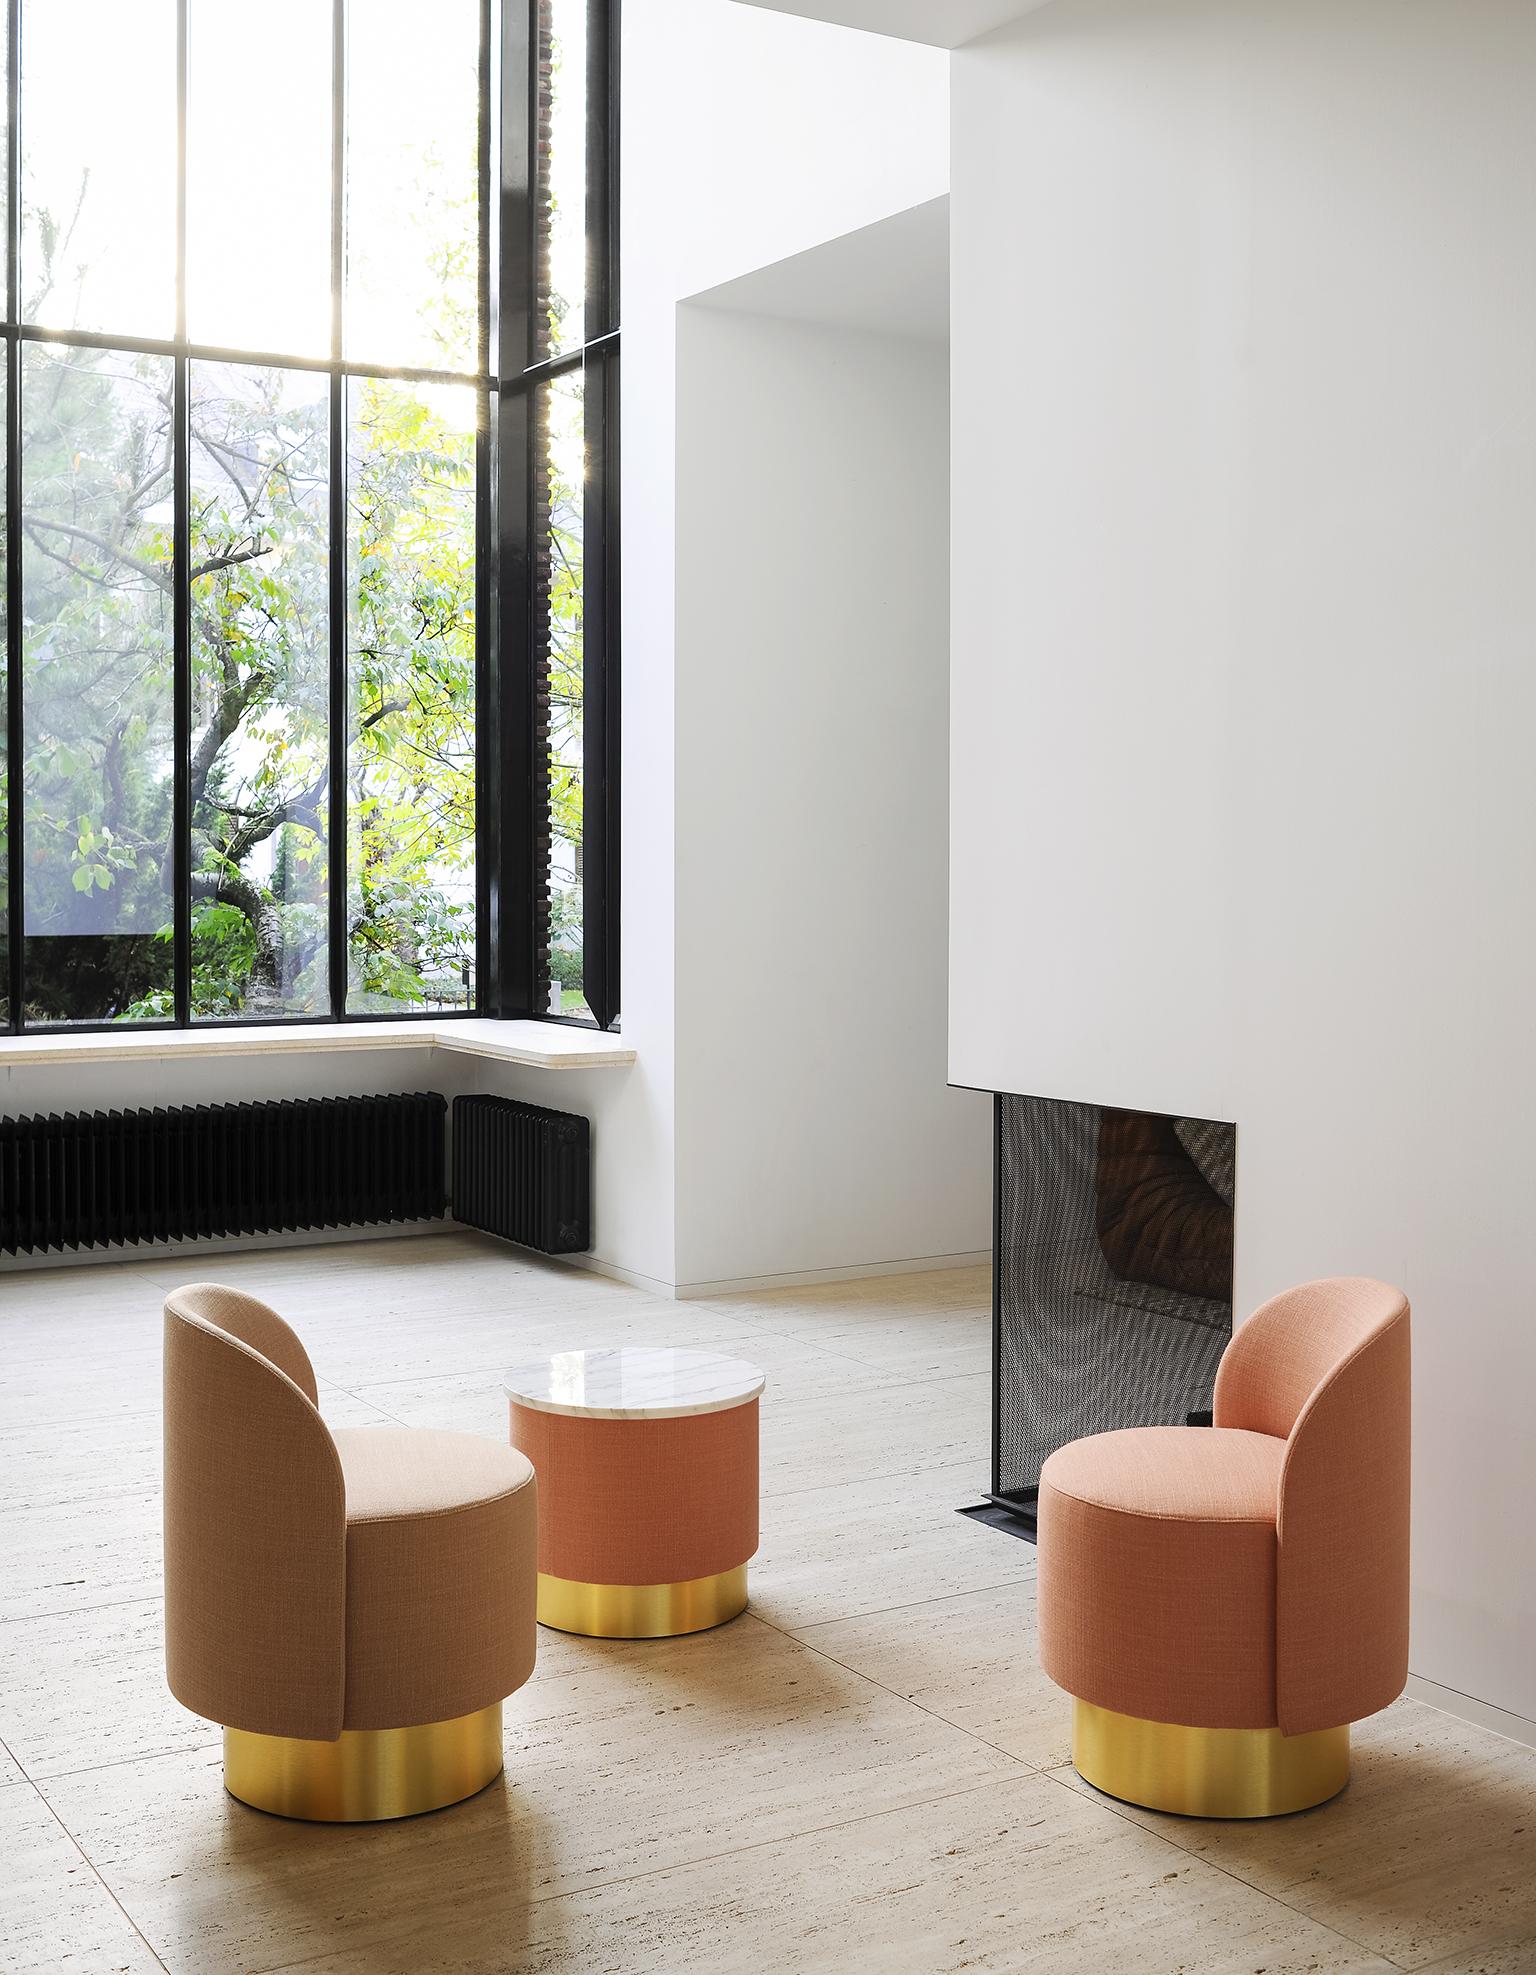 The new project with Studiopepe is a collaboration with designers Arianna Lelli Mami and Chiara Di Pinto, the creative minds behind the consultancy. Pastilles is a collection of small armchairs, ottomans and coffee tables, with soft and enveloping